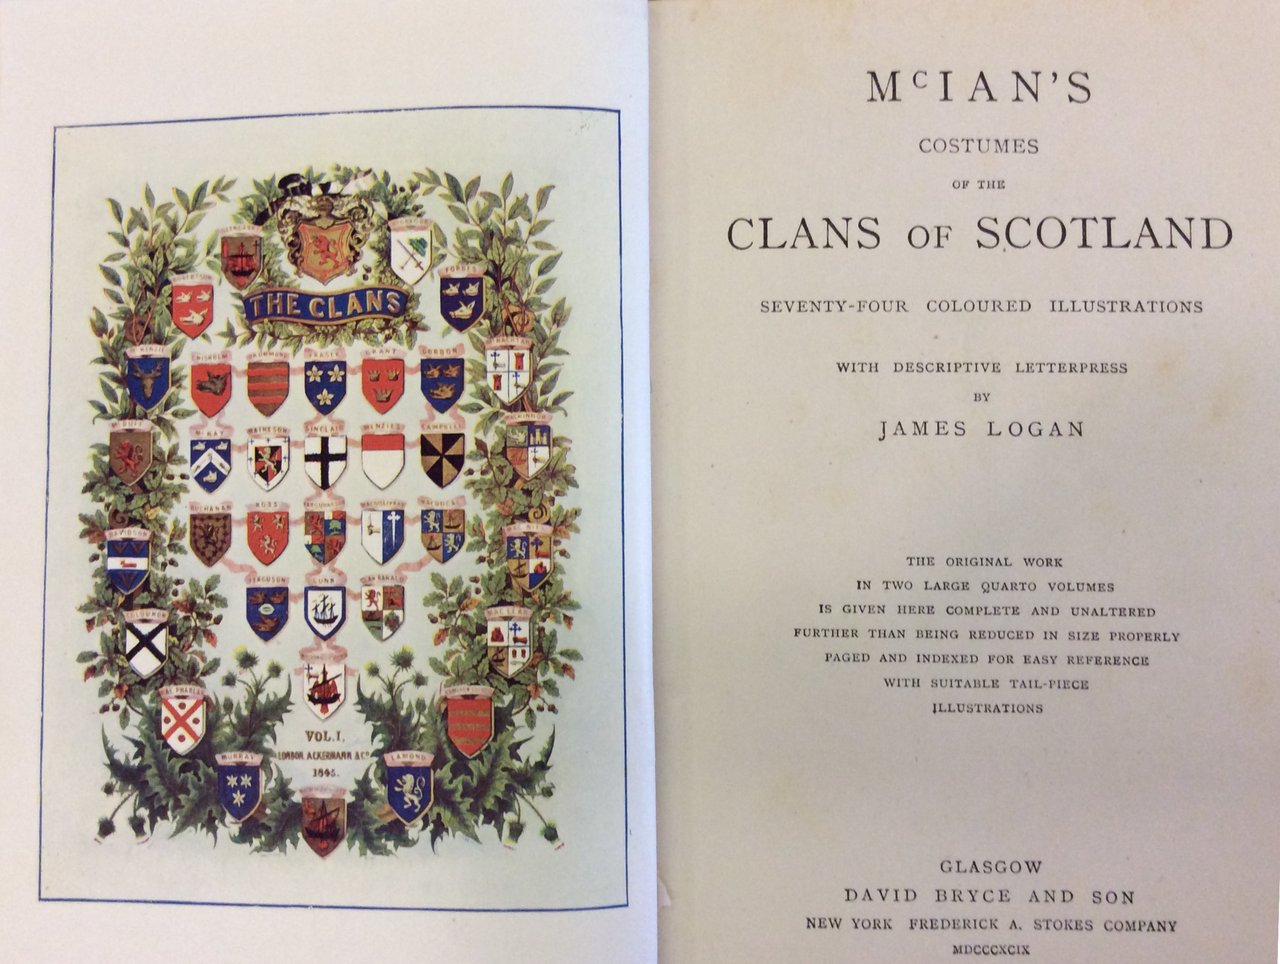 Mc .IAN'S COSTUMES OF THE CLANS OF SCOTLAND. - Seventy-four …